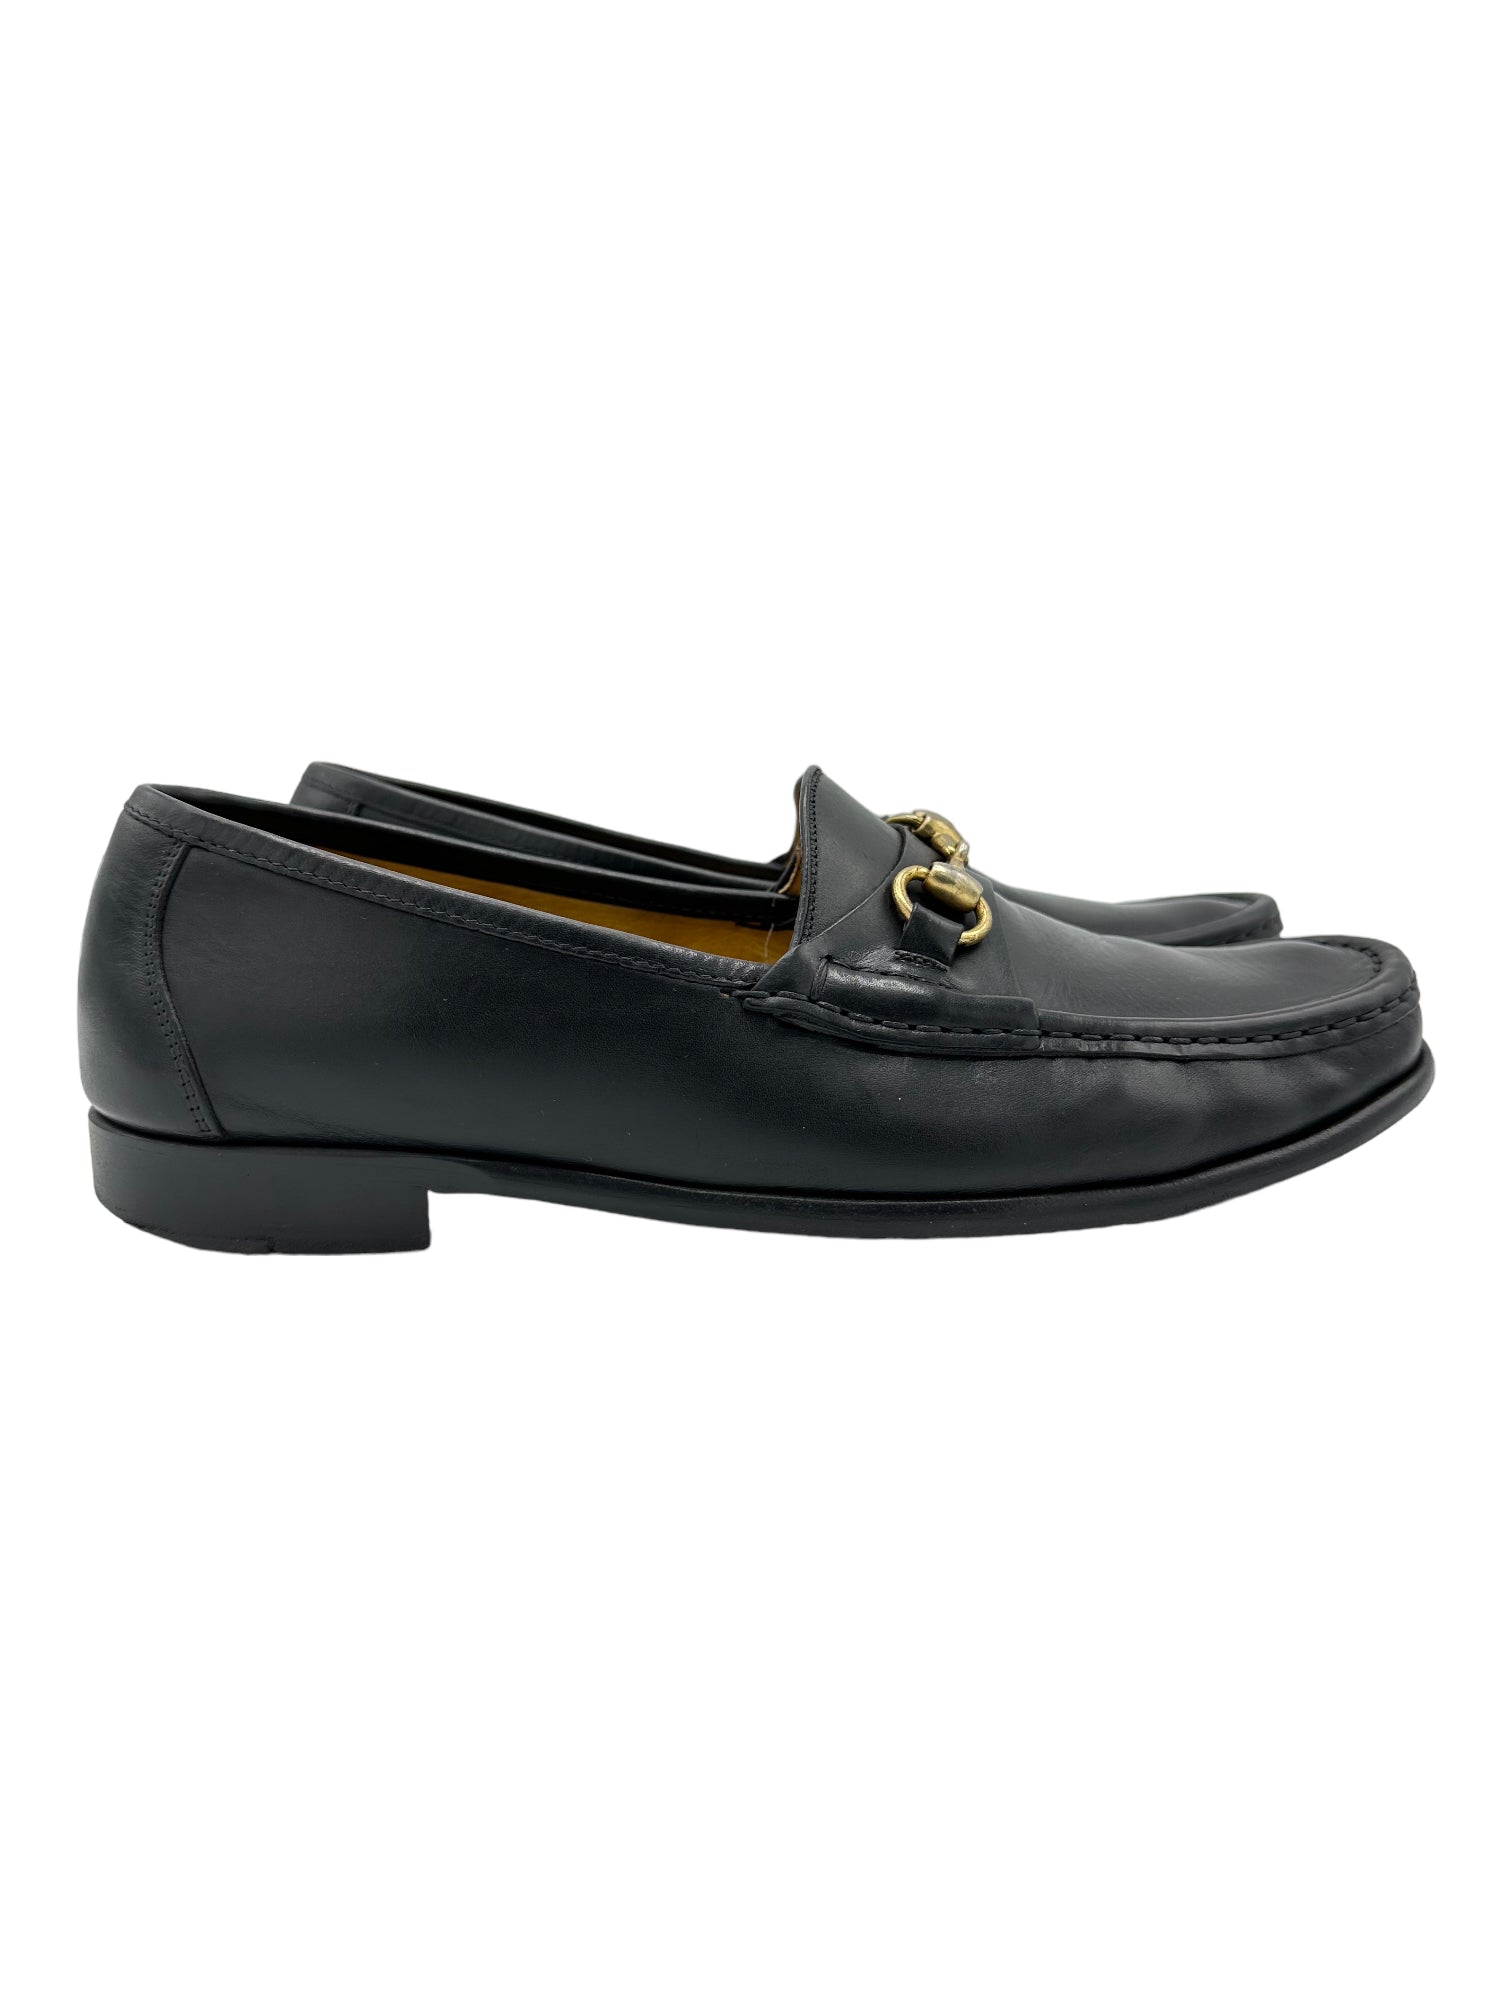 Cole Haan Black Ascot Leather Bit Loafers - Genuine Design Luxury Consignment for Men. New & Pre-Owned Clothing, Shoes, & Accessories. Calgary, Canada